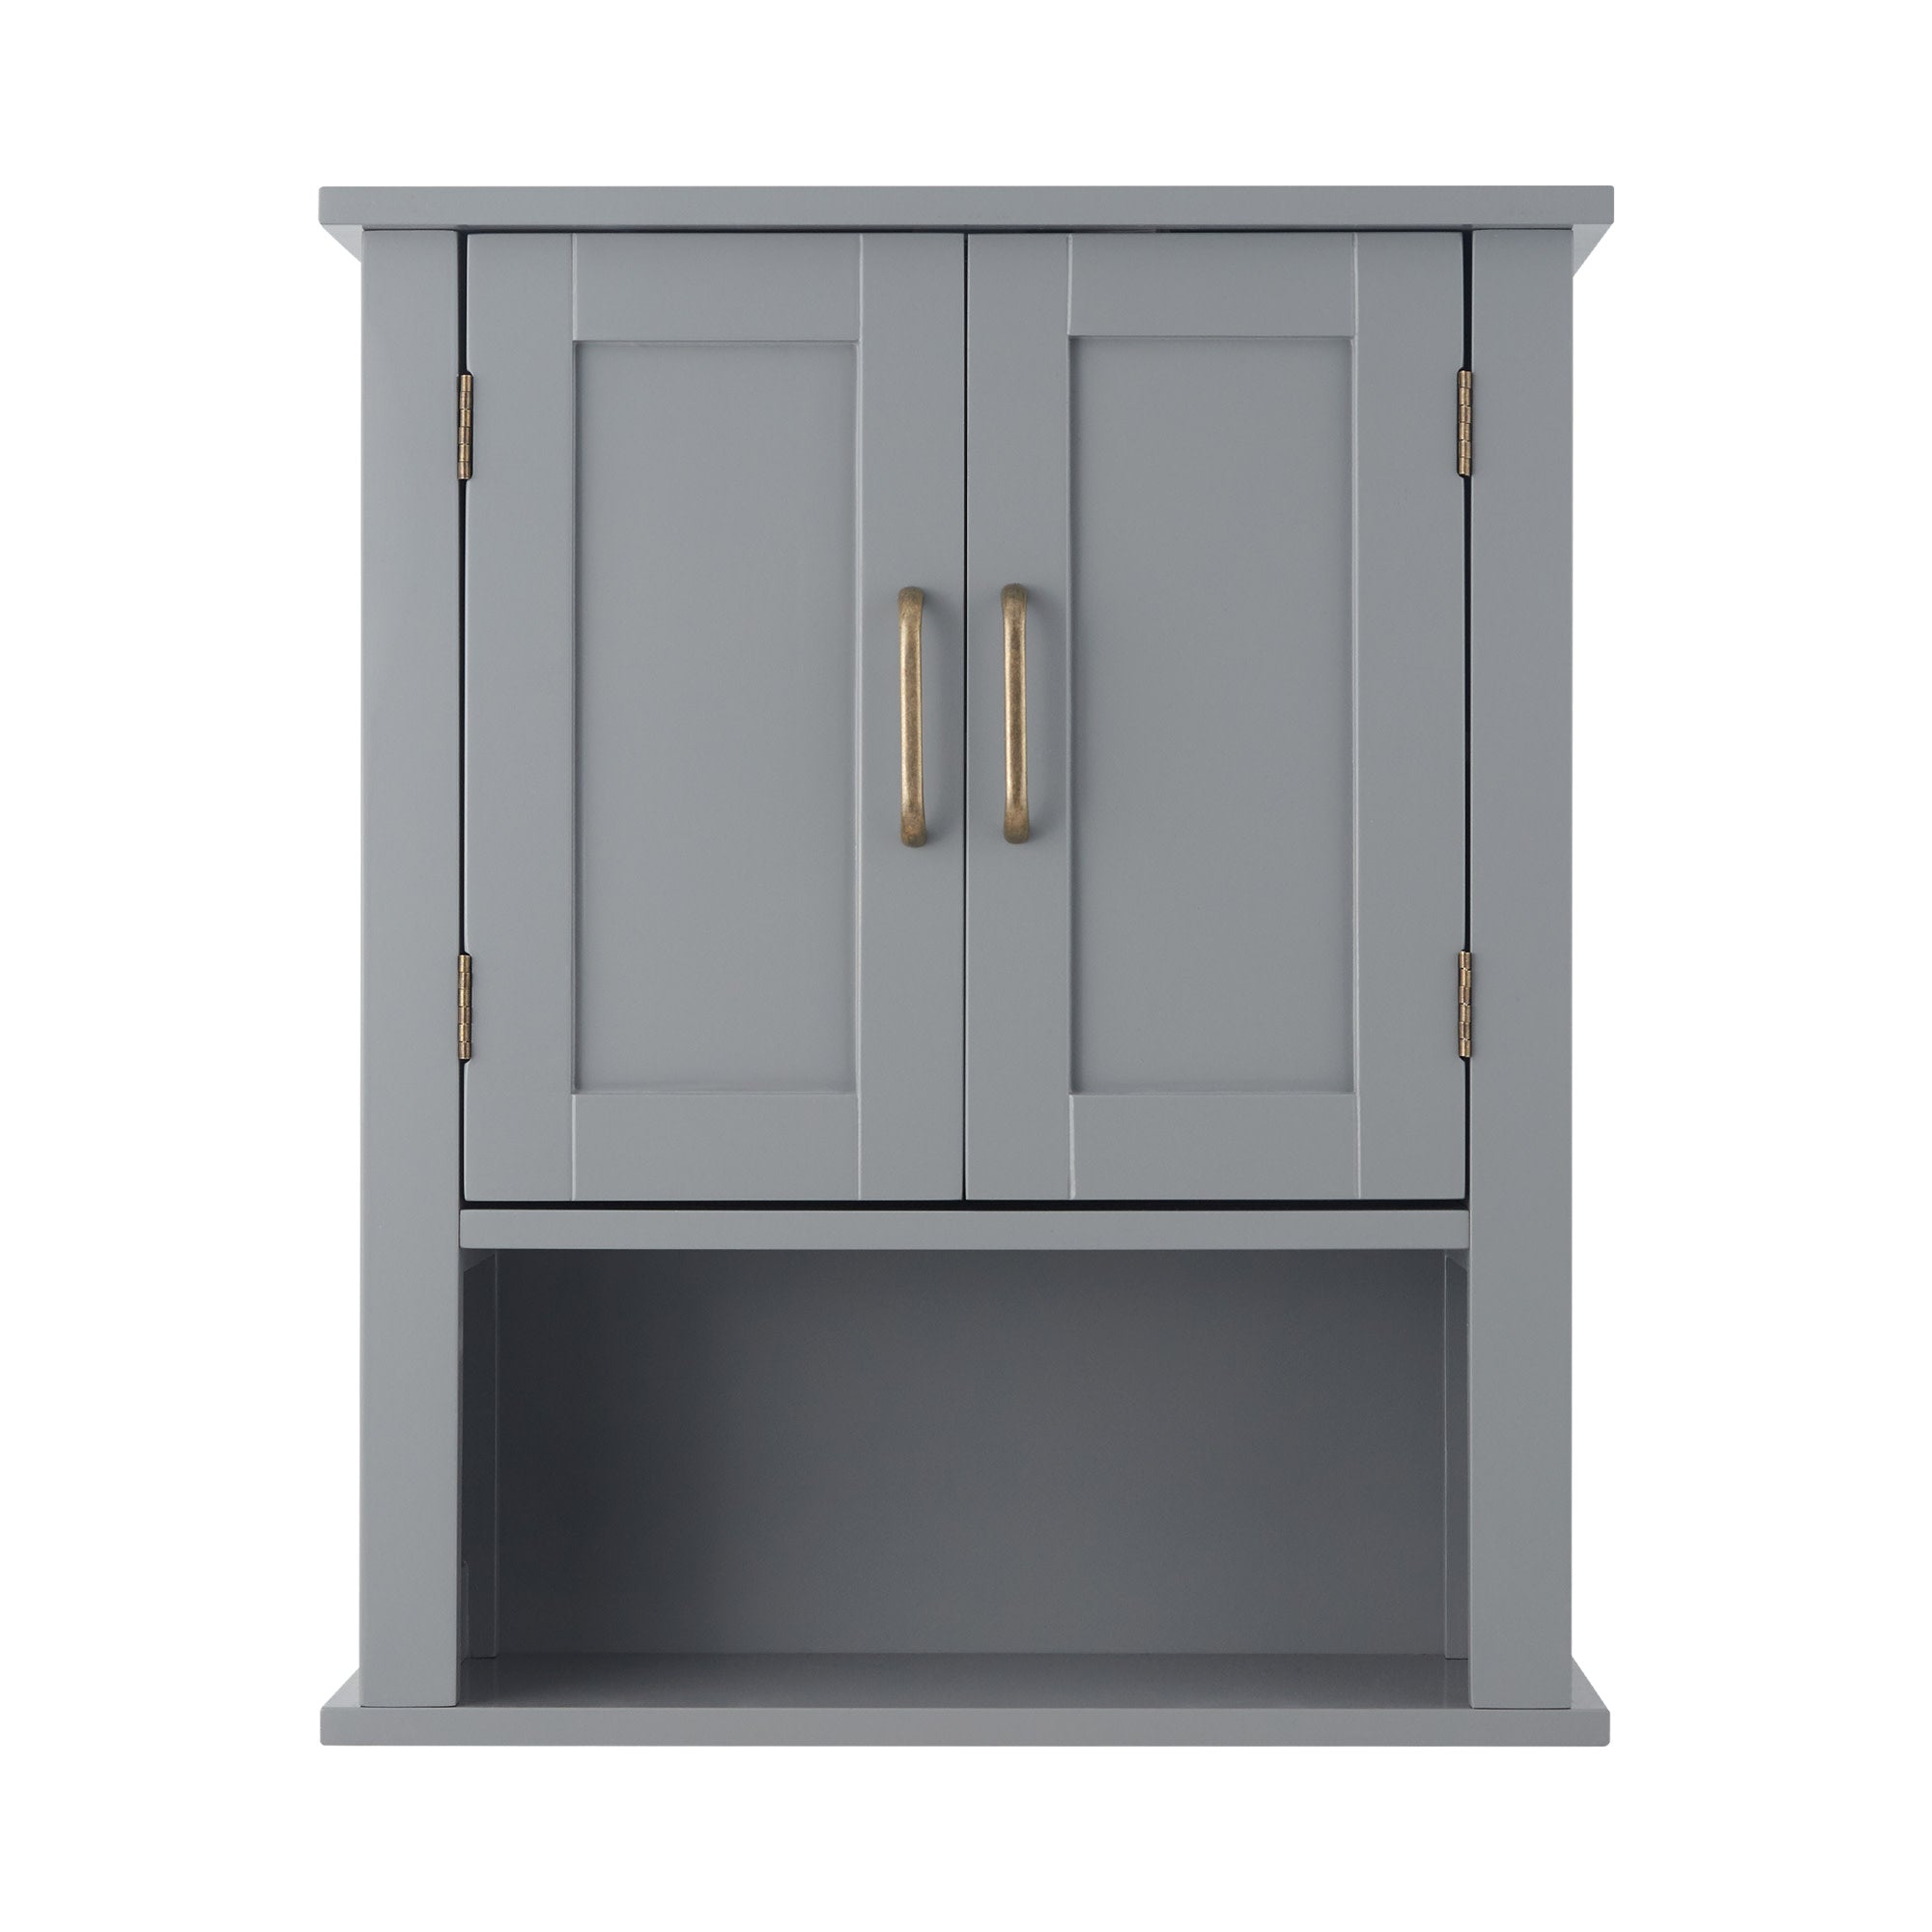 Teamson Home Mercer Mid Century Modern Removable Wooden Cabinet, Gray